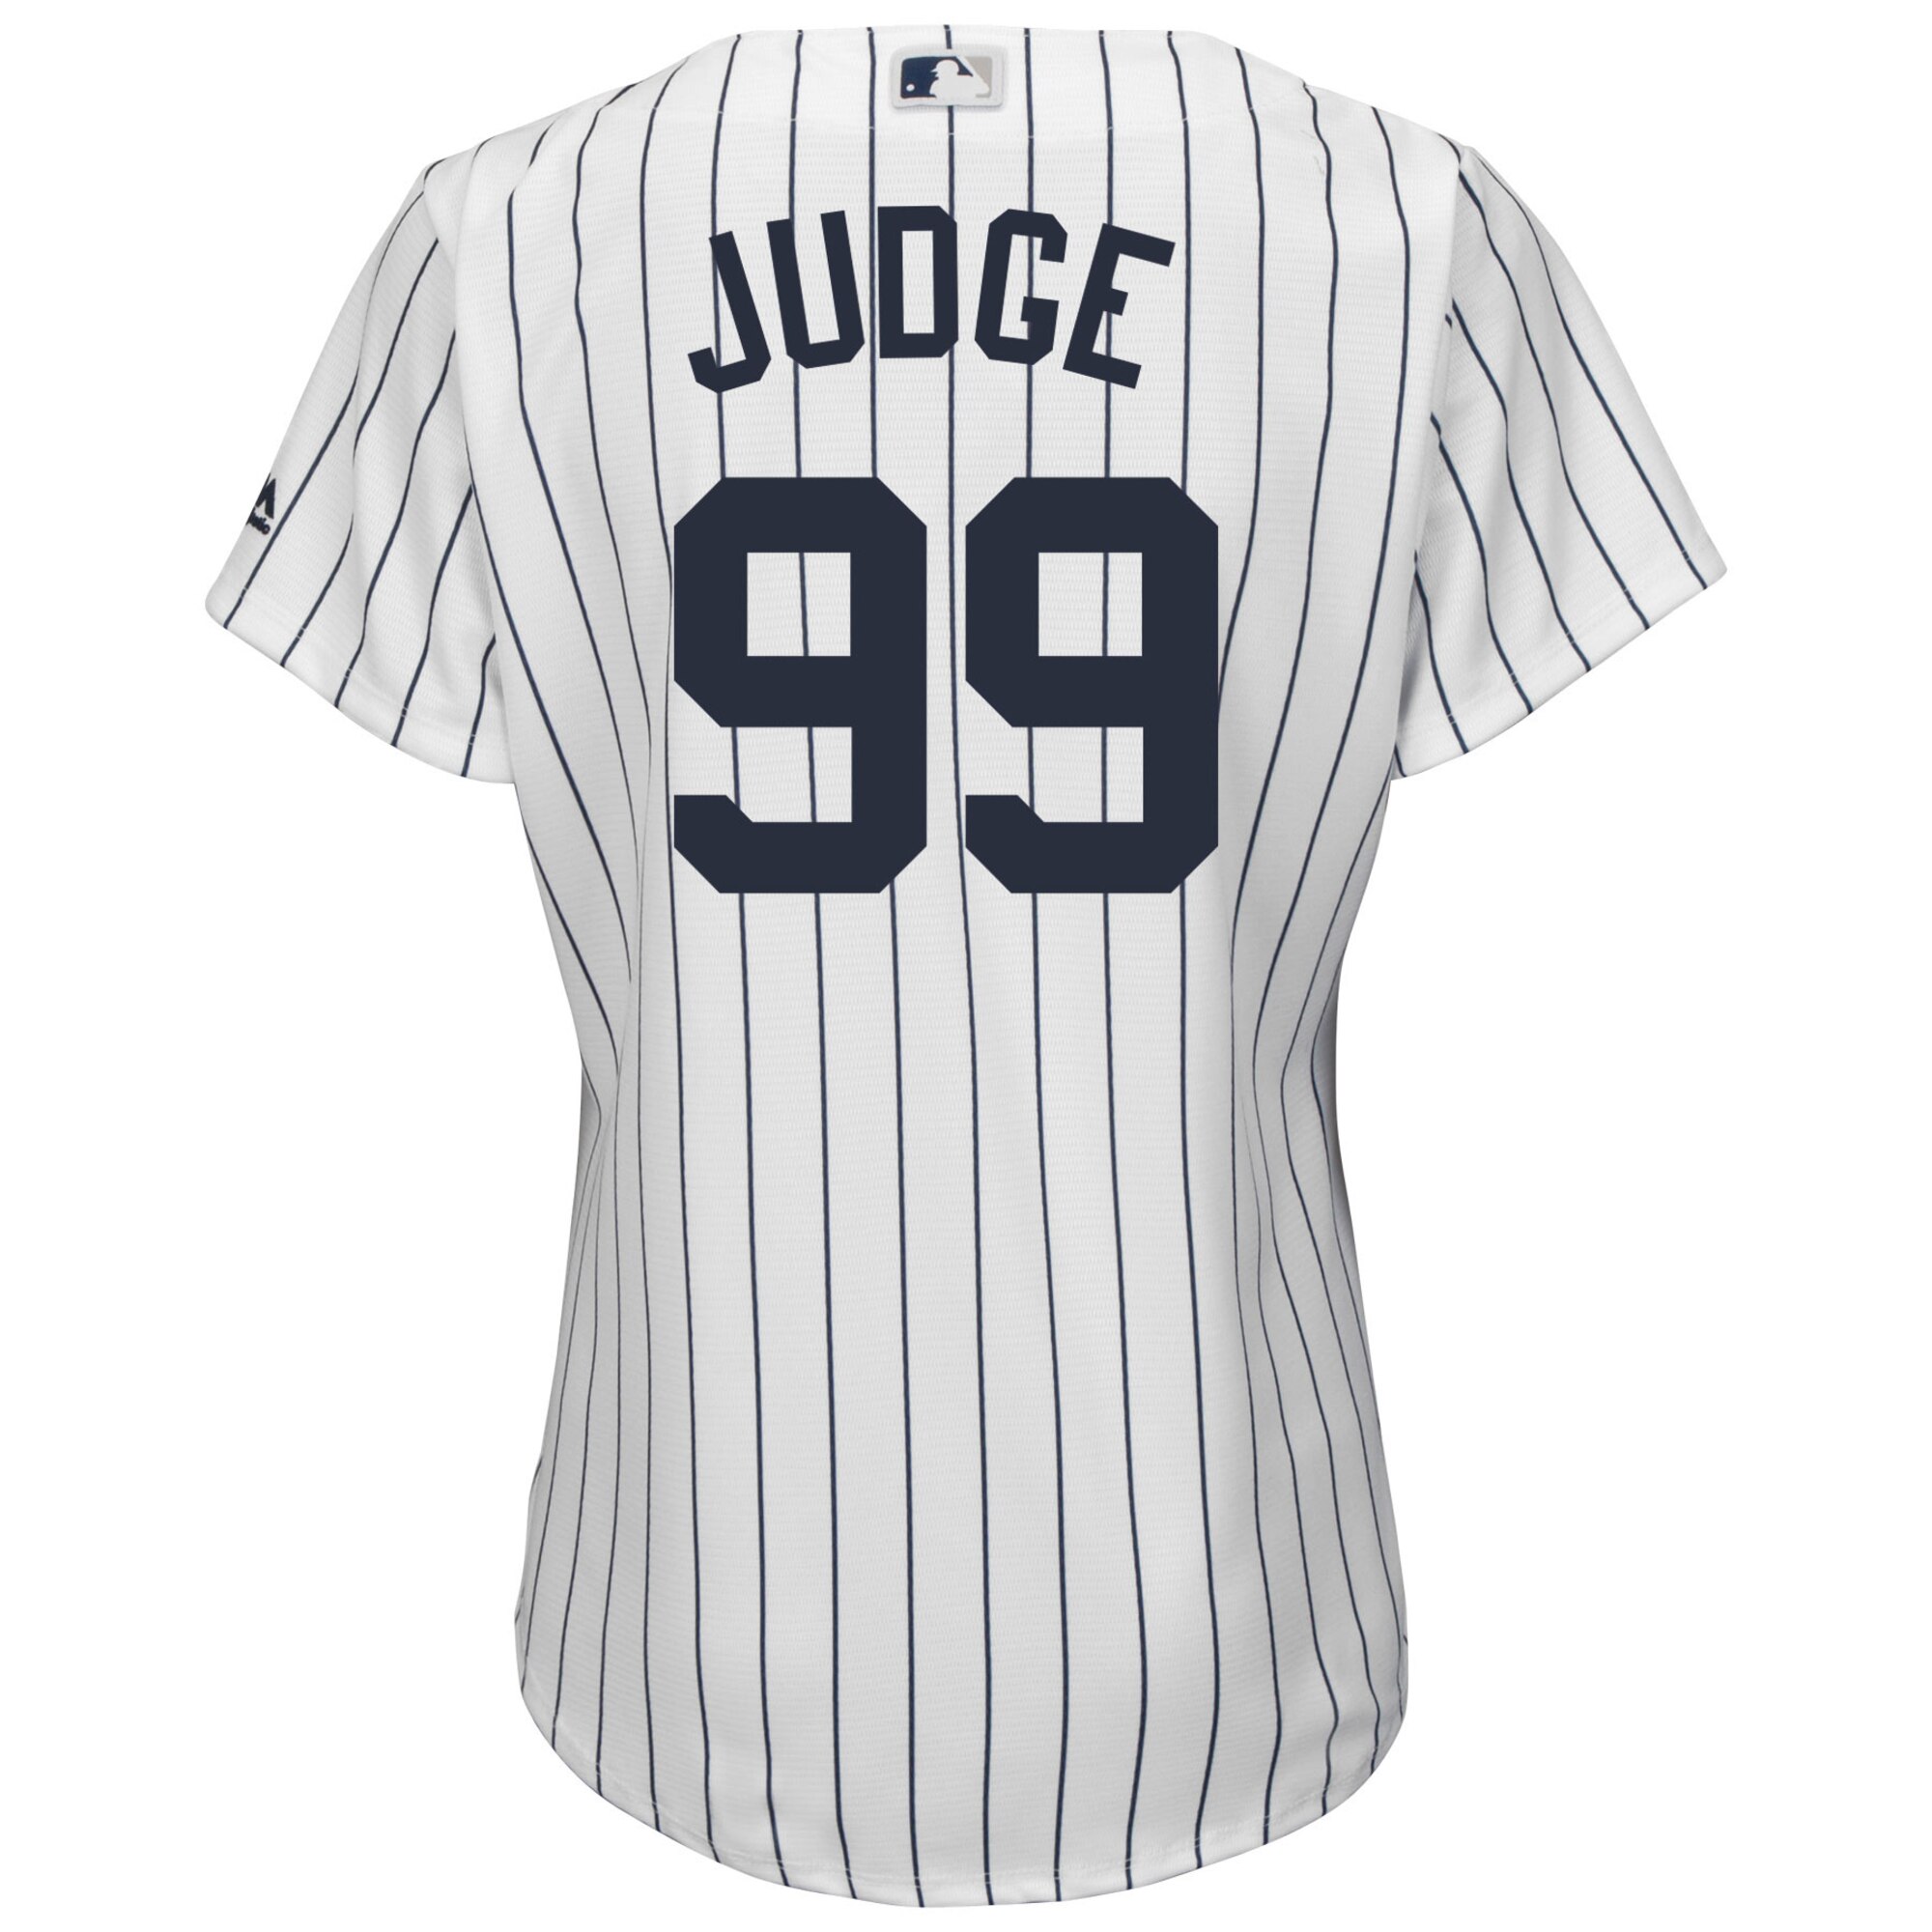 New York Yankees Aaron Judge Jersey Size Large for Sale in Hudson, Florida  - OfferUp